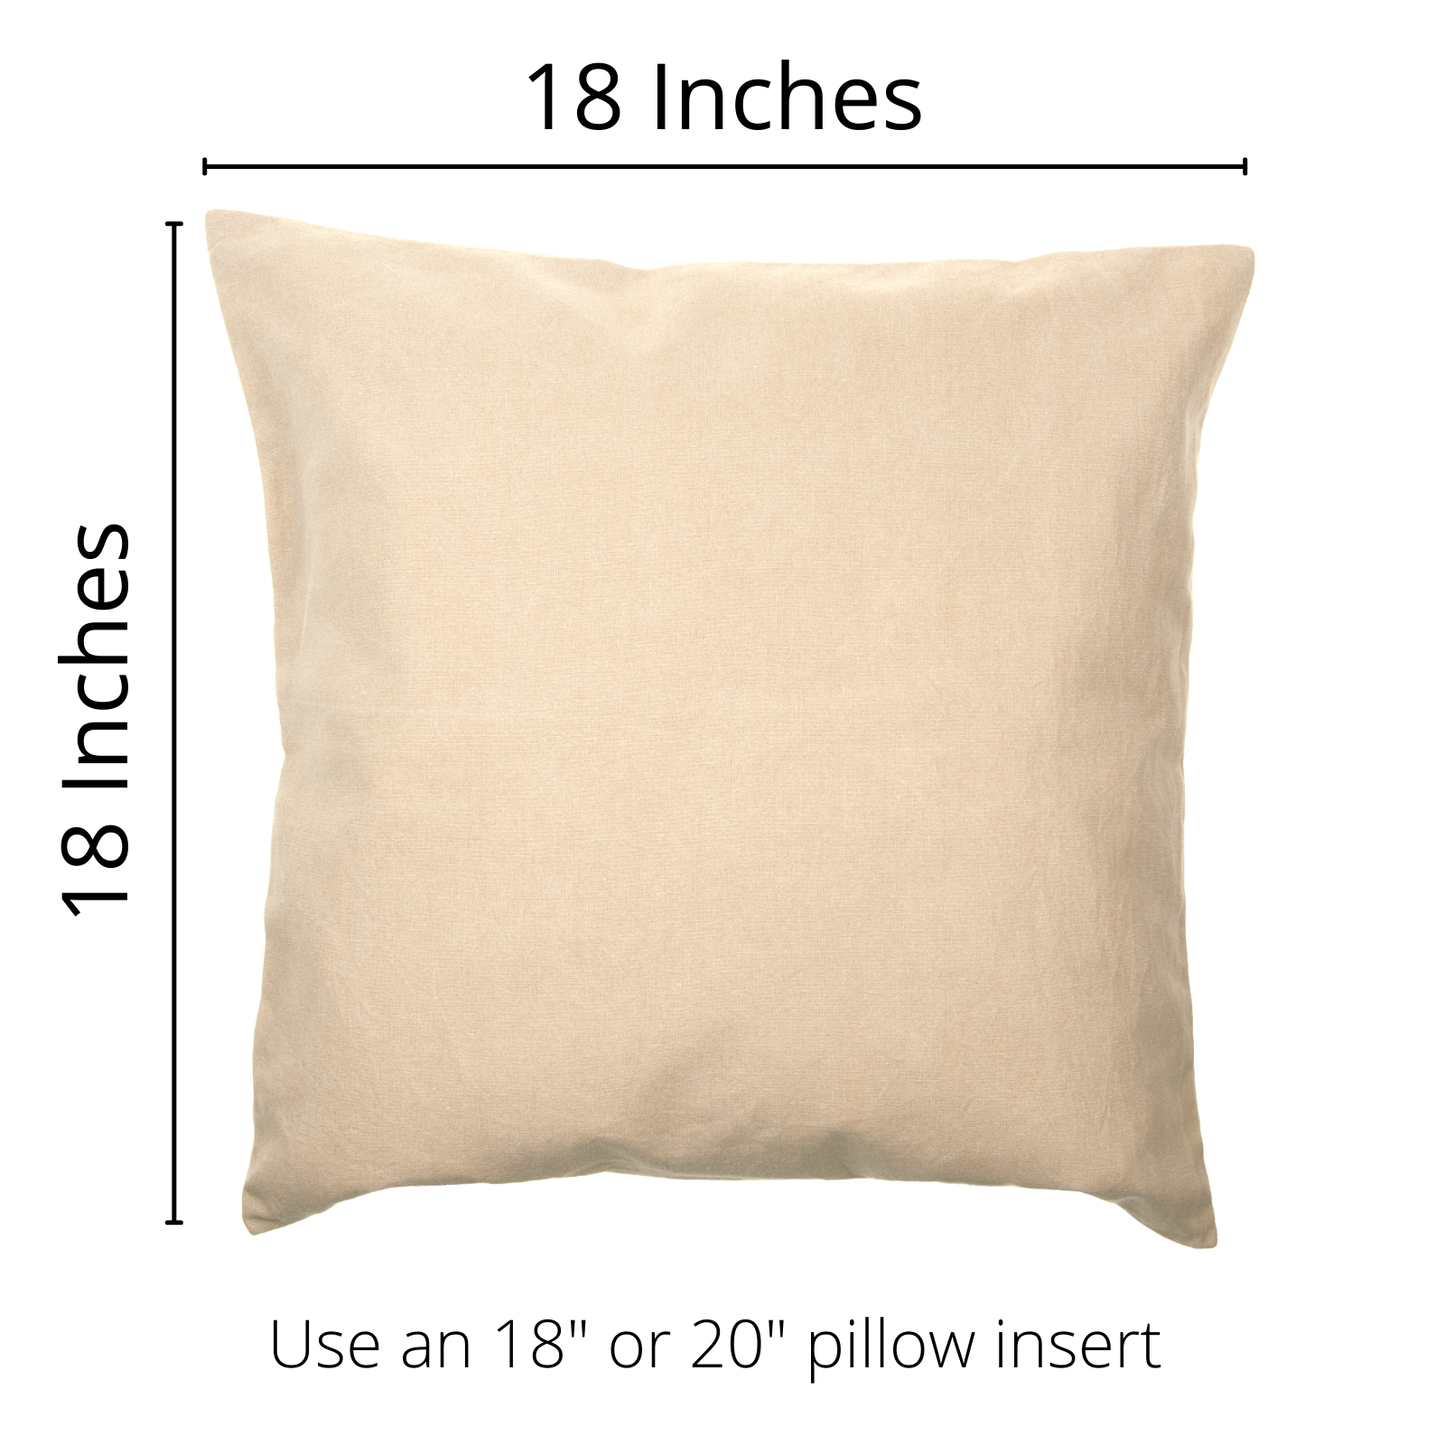 New Hampshire Pillow Cover